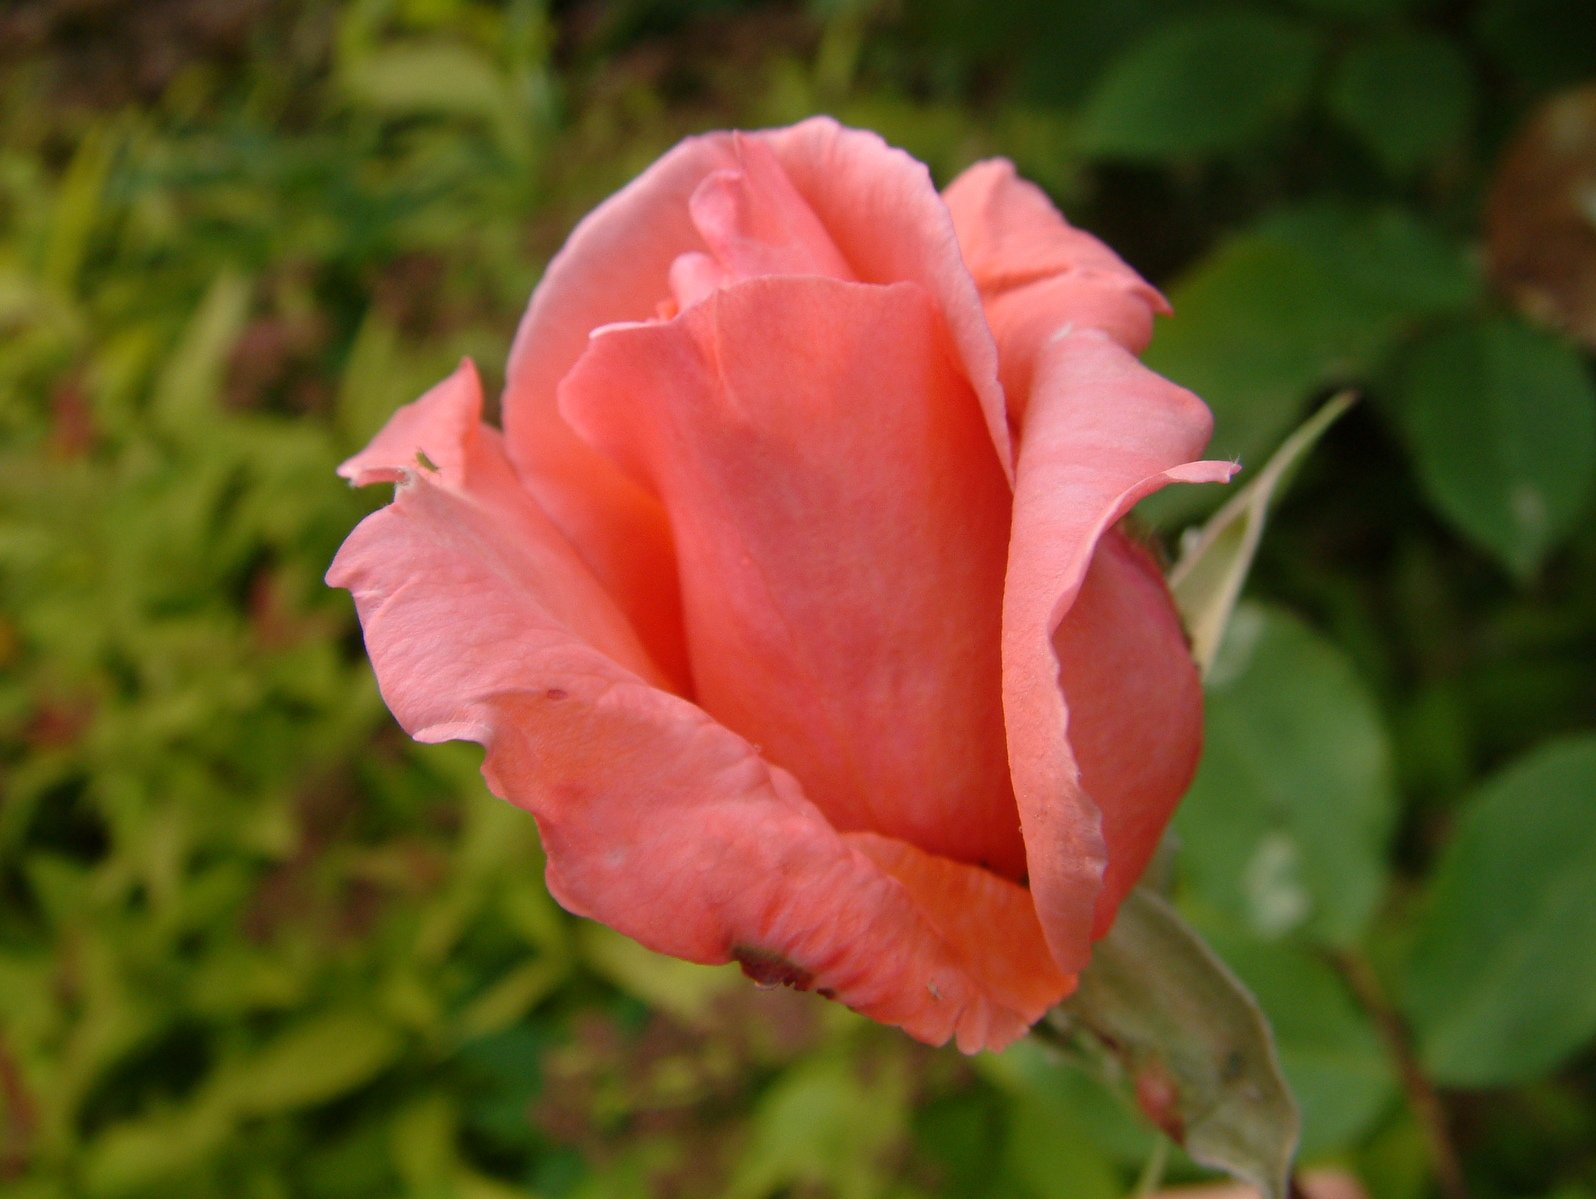 there is a pink rose blossom in bloom